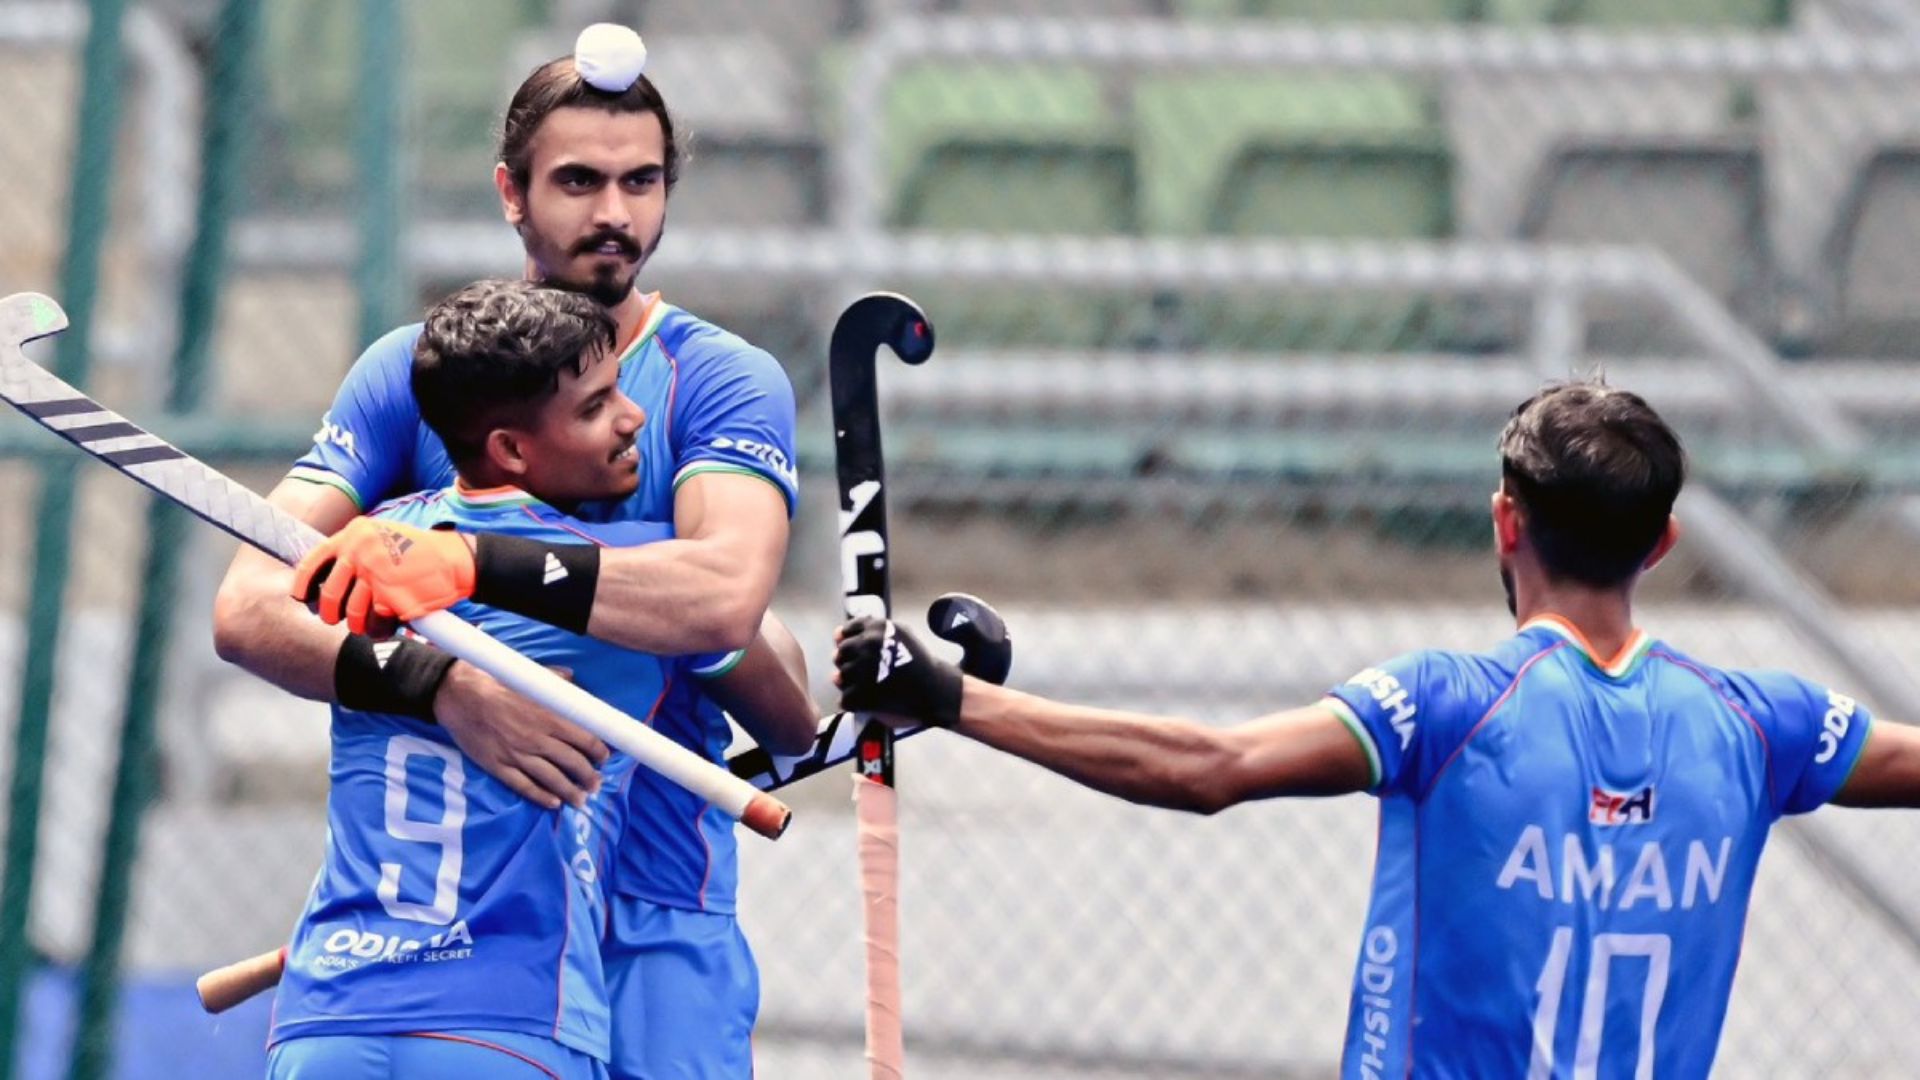 Indian Junior Men’s Hockey Team Narrowly Defeated 2-3 By Germany In Exciting Match